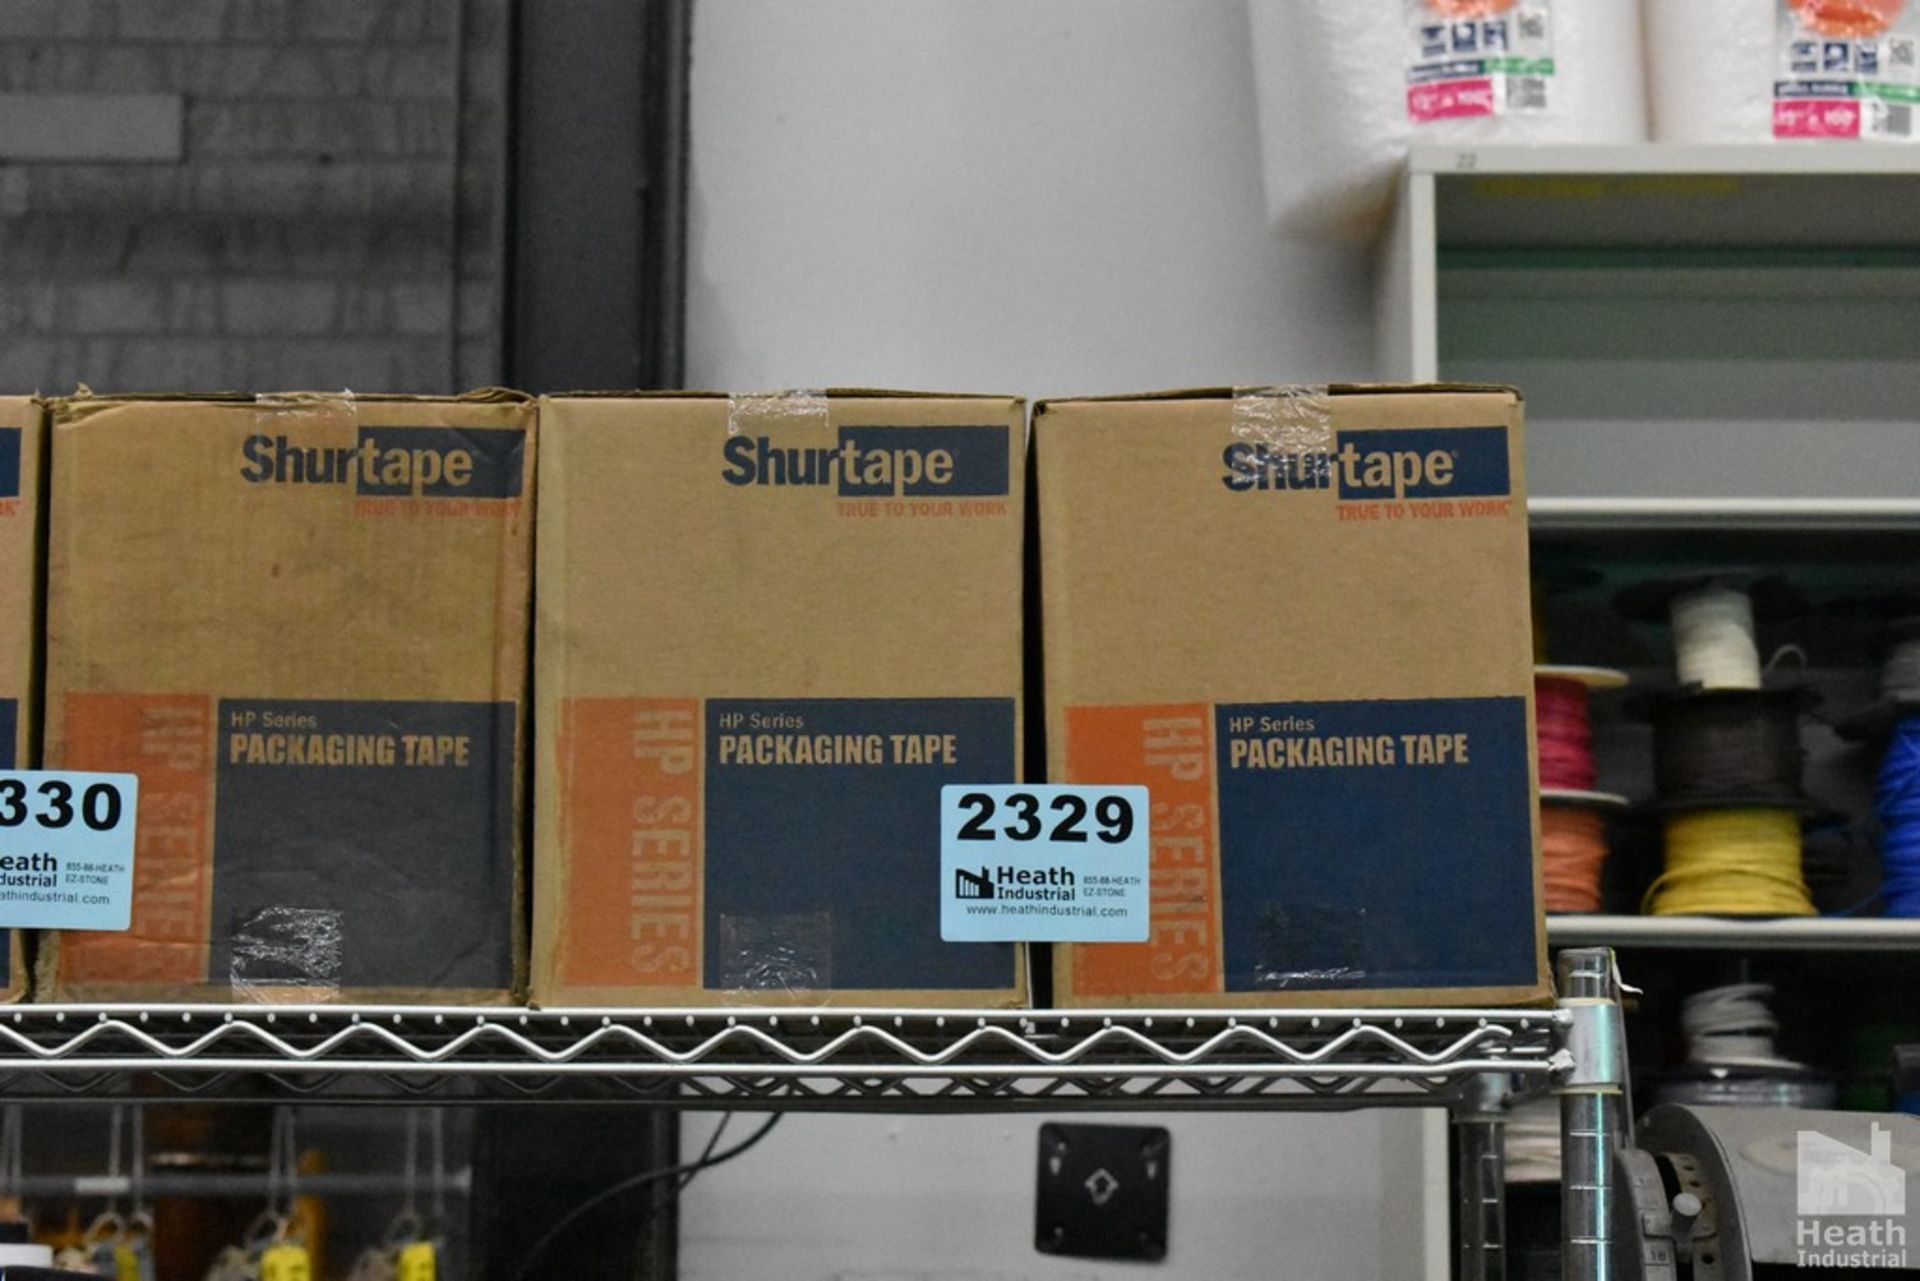 (2) BOXES OF SHURTAPE PACKING TAPE, 48MM X 100M